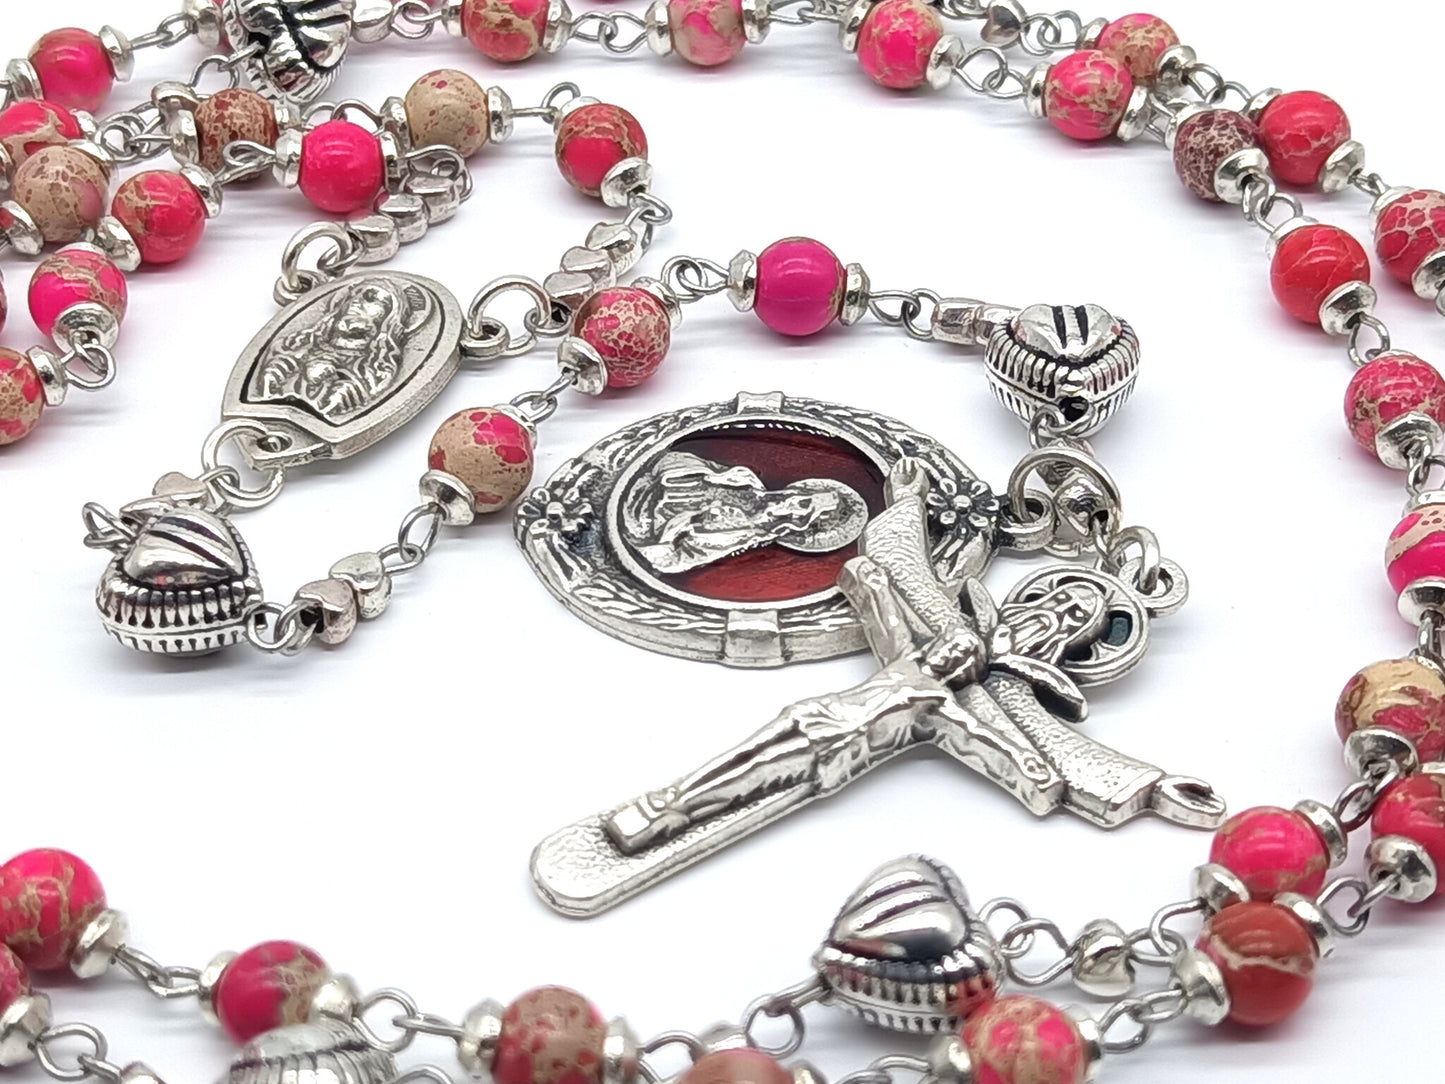 Sacred Heart unique rosary beads with pink gemstone beads, silver crucifix, heart pater beads and Scared Heart medal.